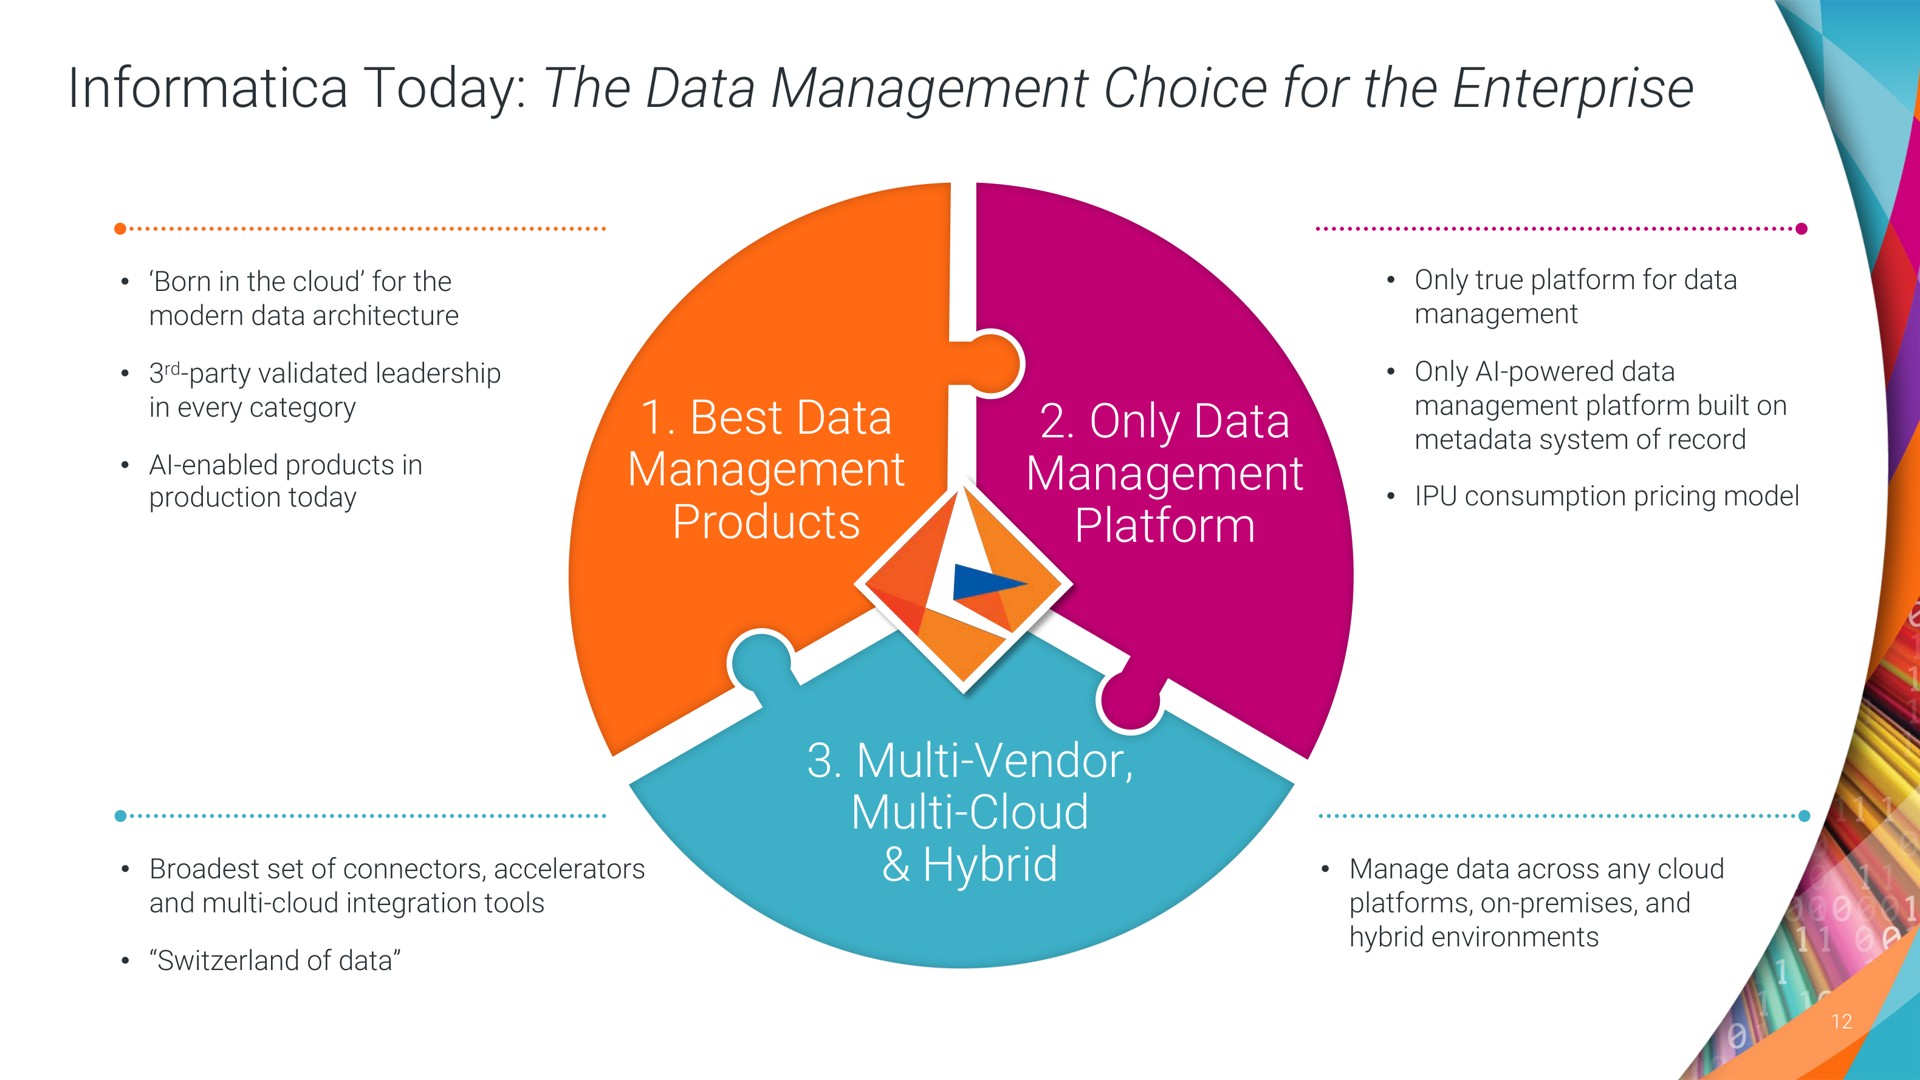 today the data management choice for the enterprise best data management products only data management platform vendor cloud hybrid sieves rials a mae | Informatica